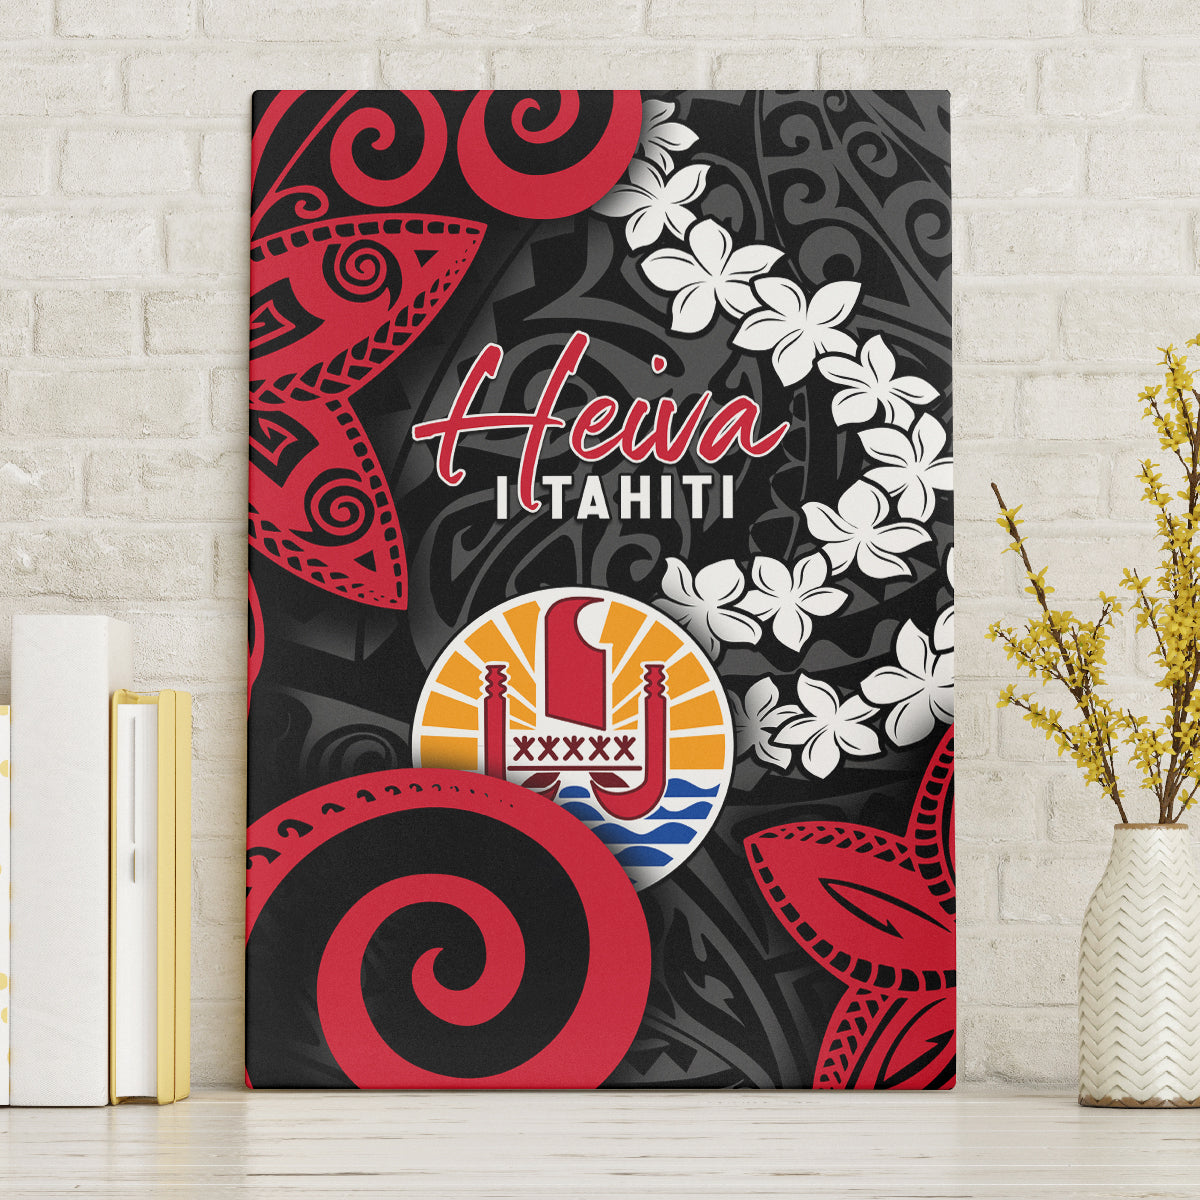 Tahiti Heiva Festival Canvas Wall Art Floral Pattern With Coat Of Arms